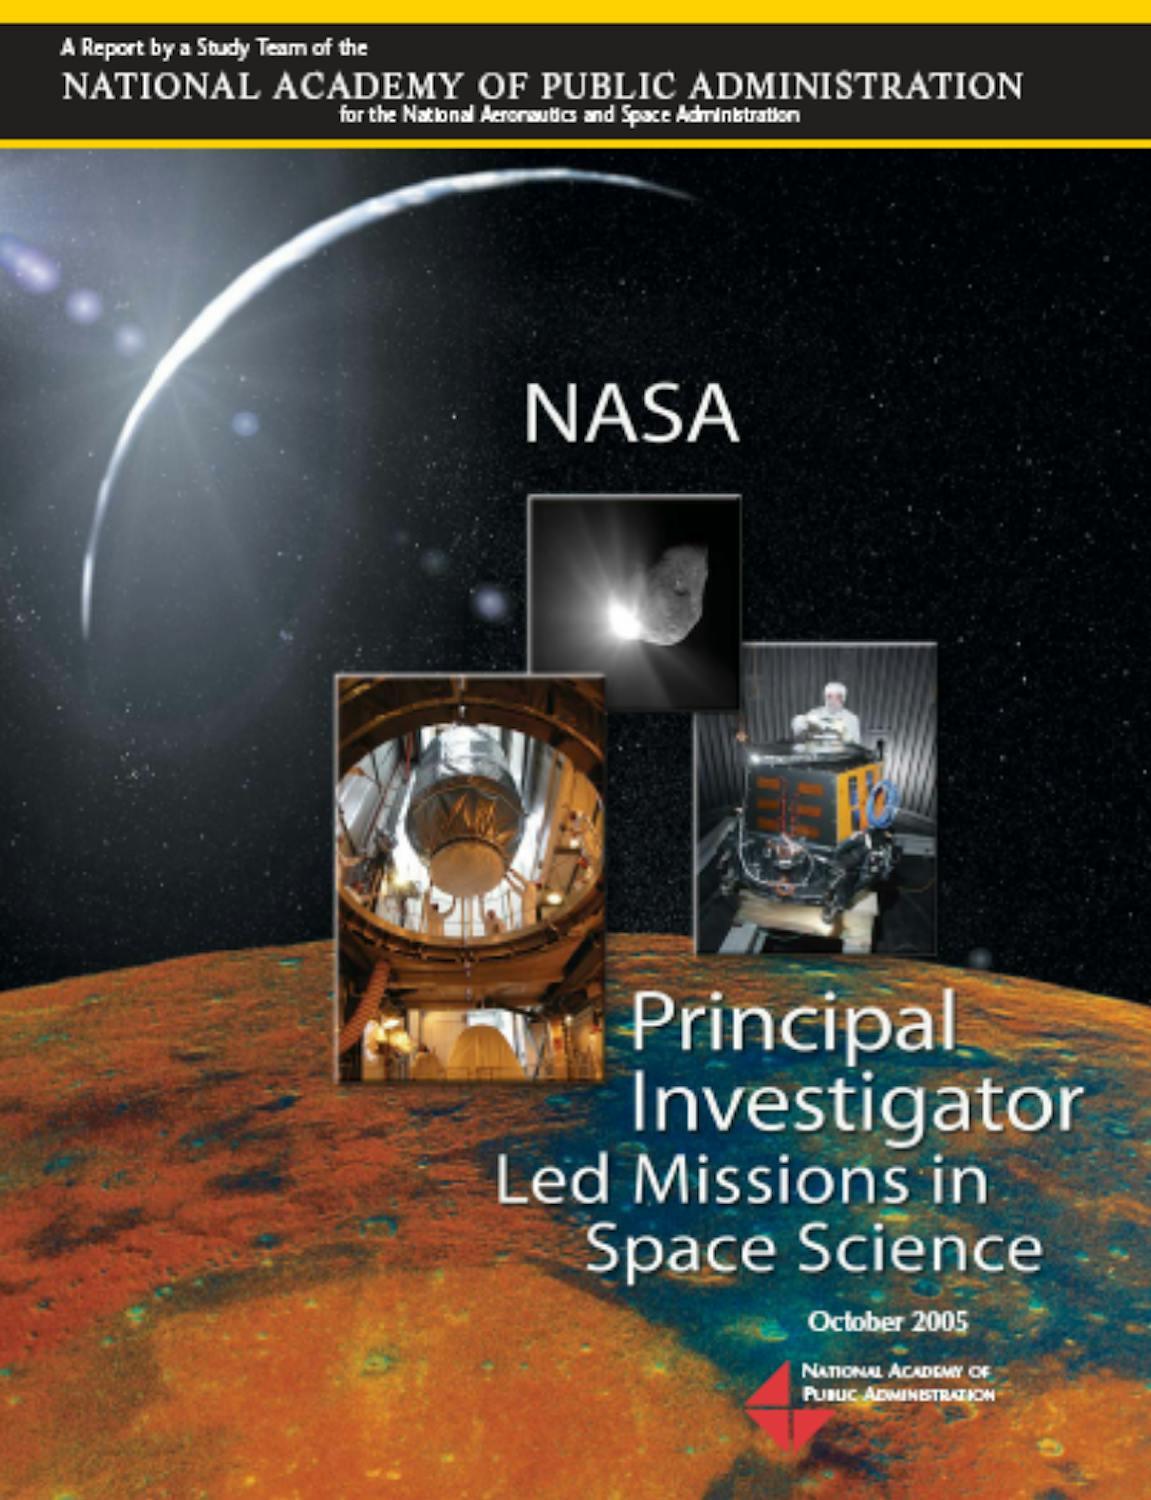 05 Principal Investigator Led Missions Space Science